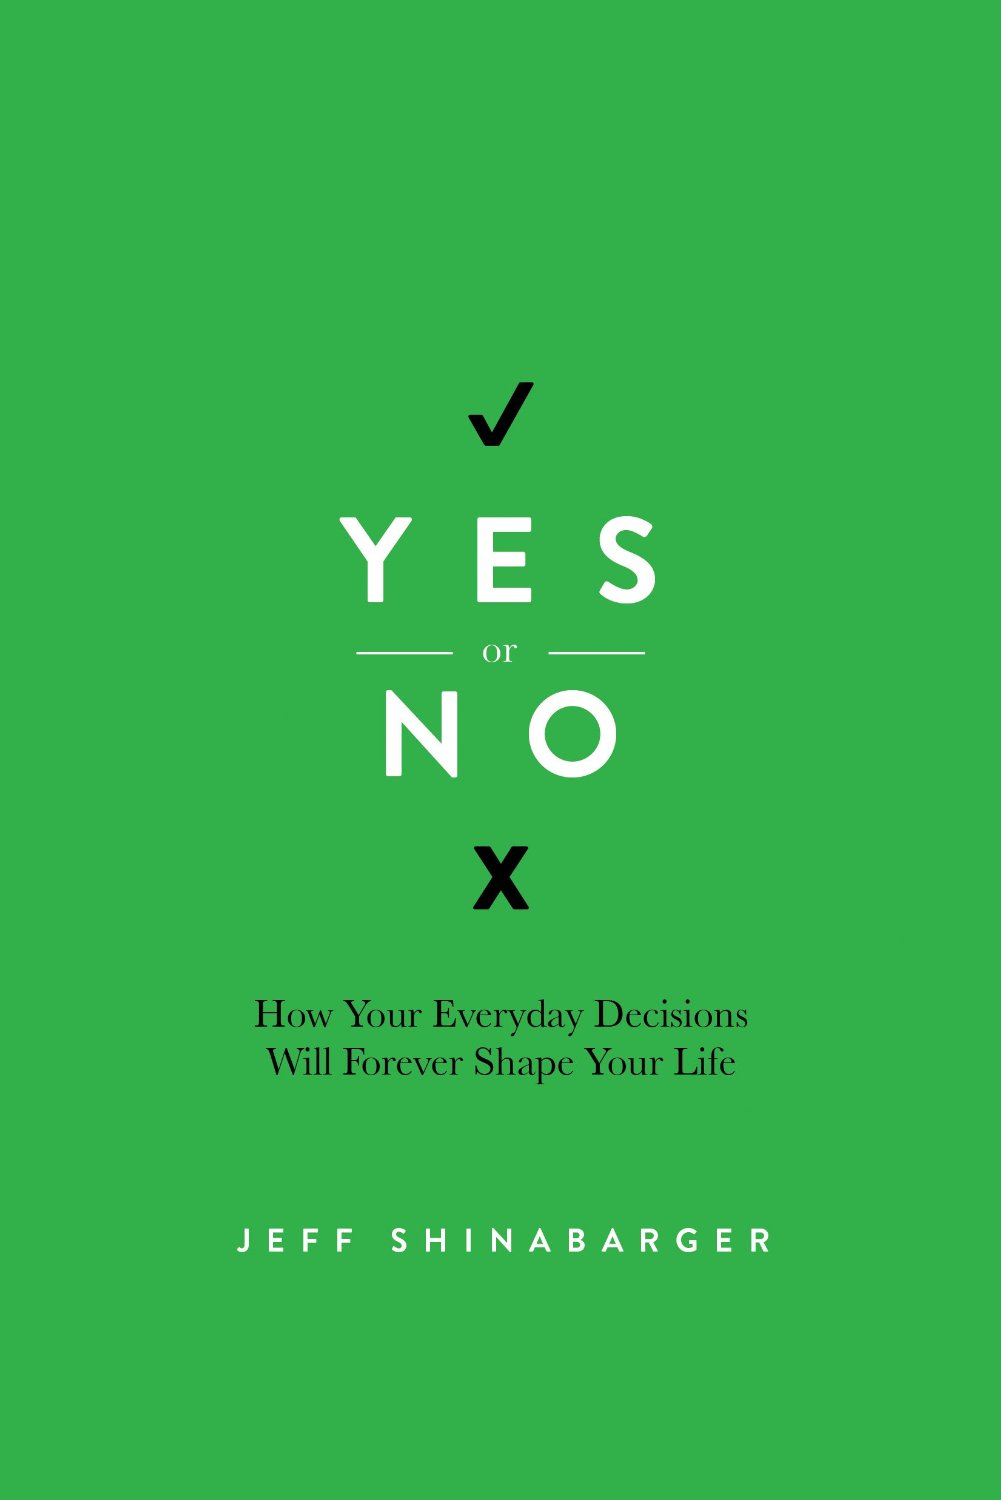 Book Review: Yes or No by Jeff Shinabarger